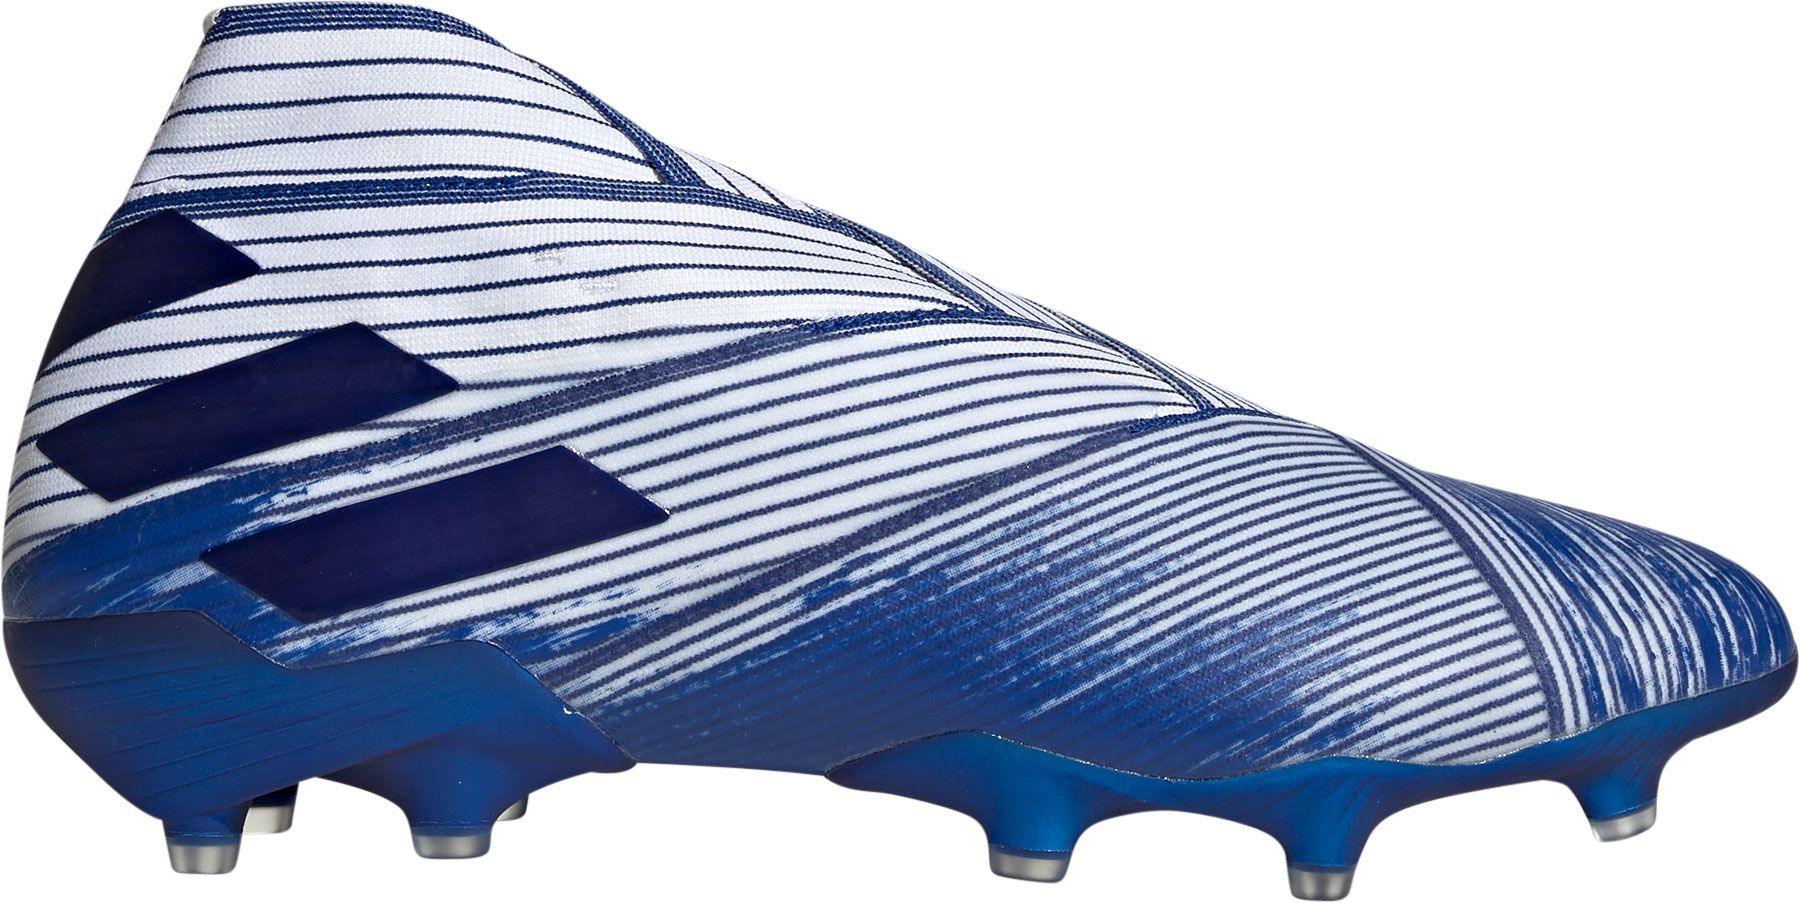 blue and white adidas soccer cleats